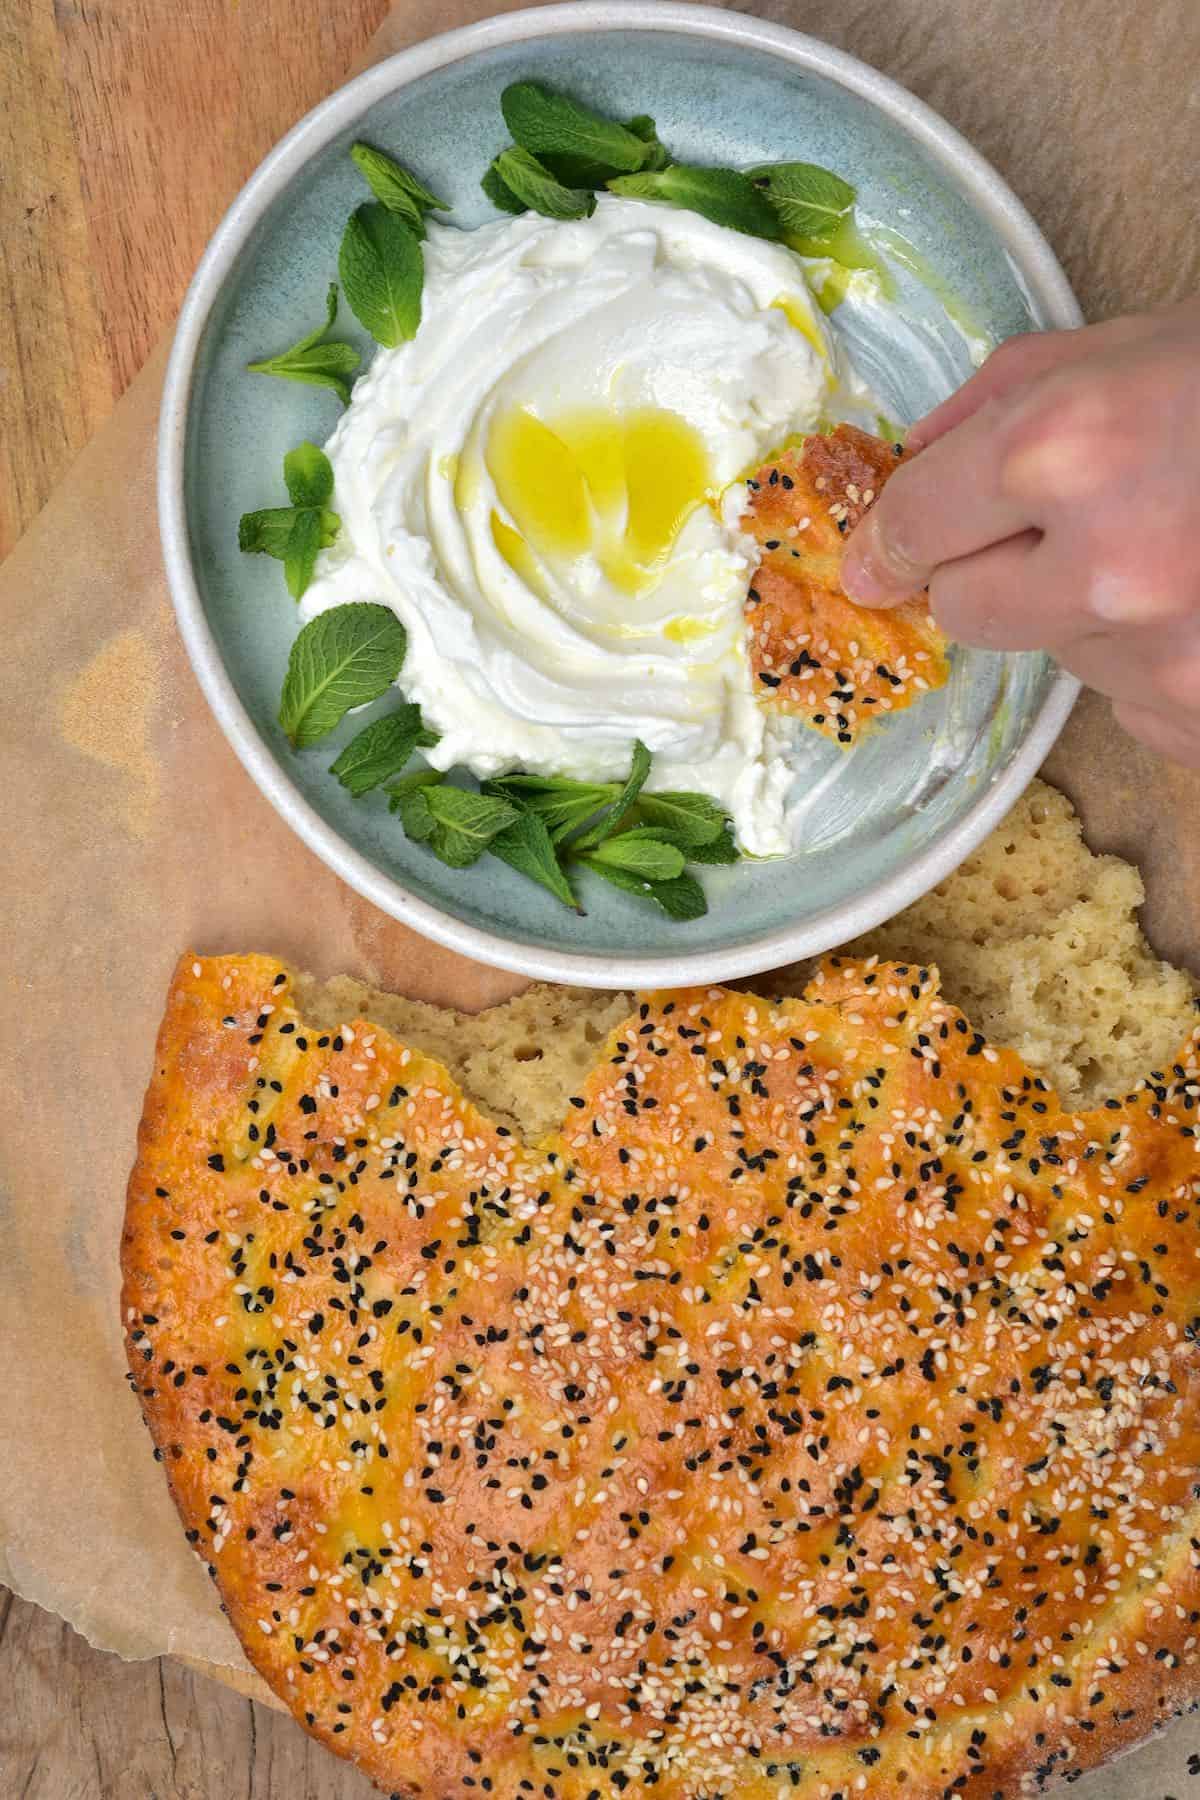 Pide bread and a bowl with labneh with a piece of bread being dipped in it